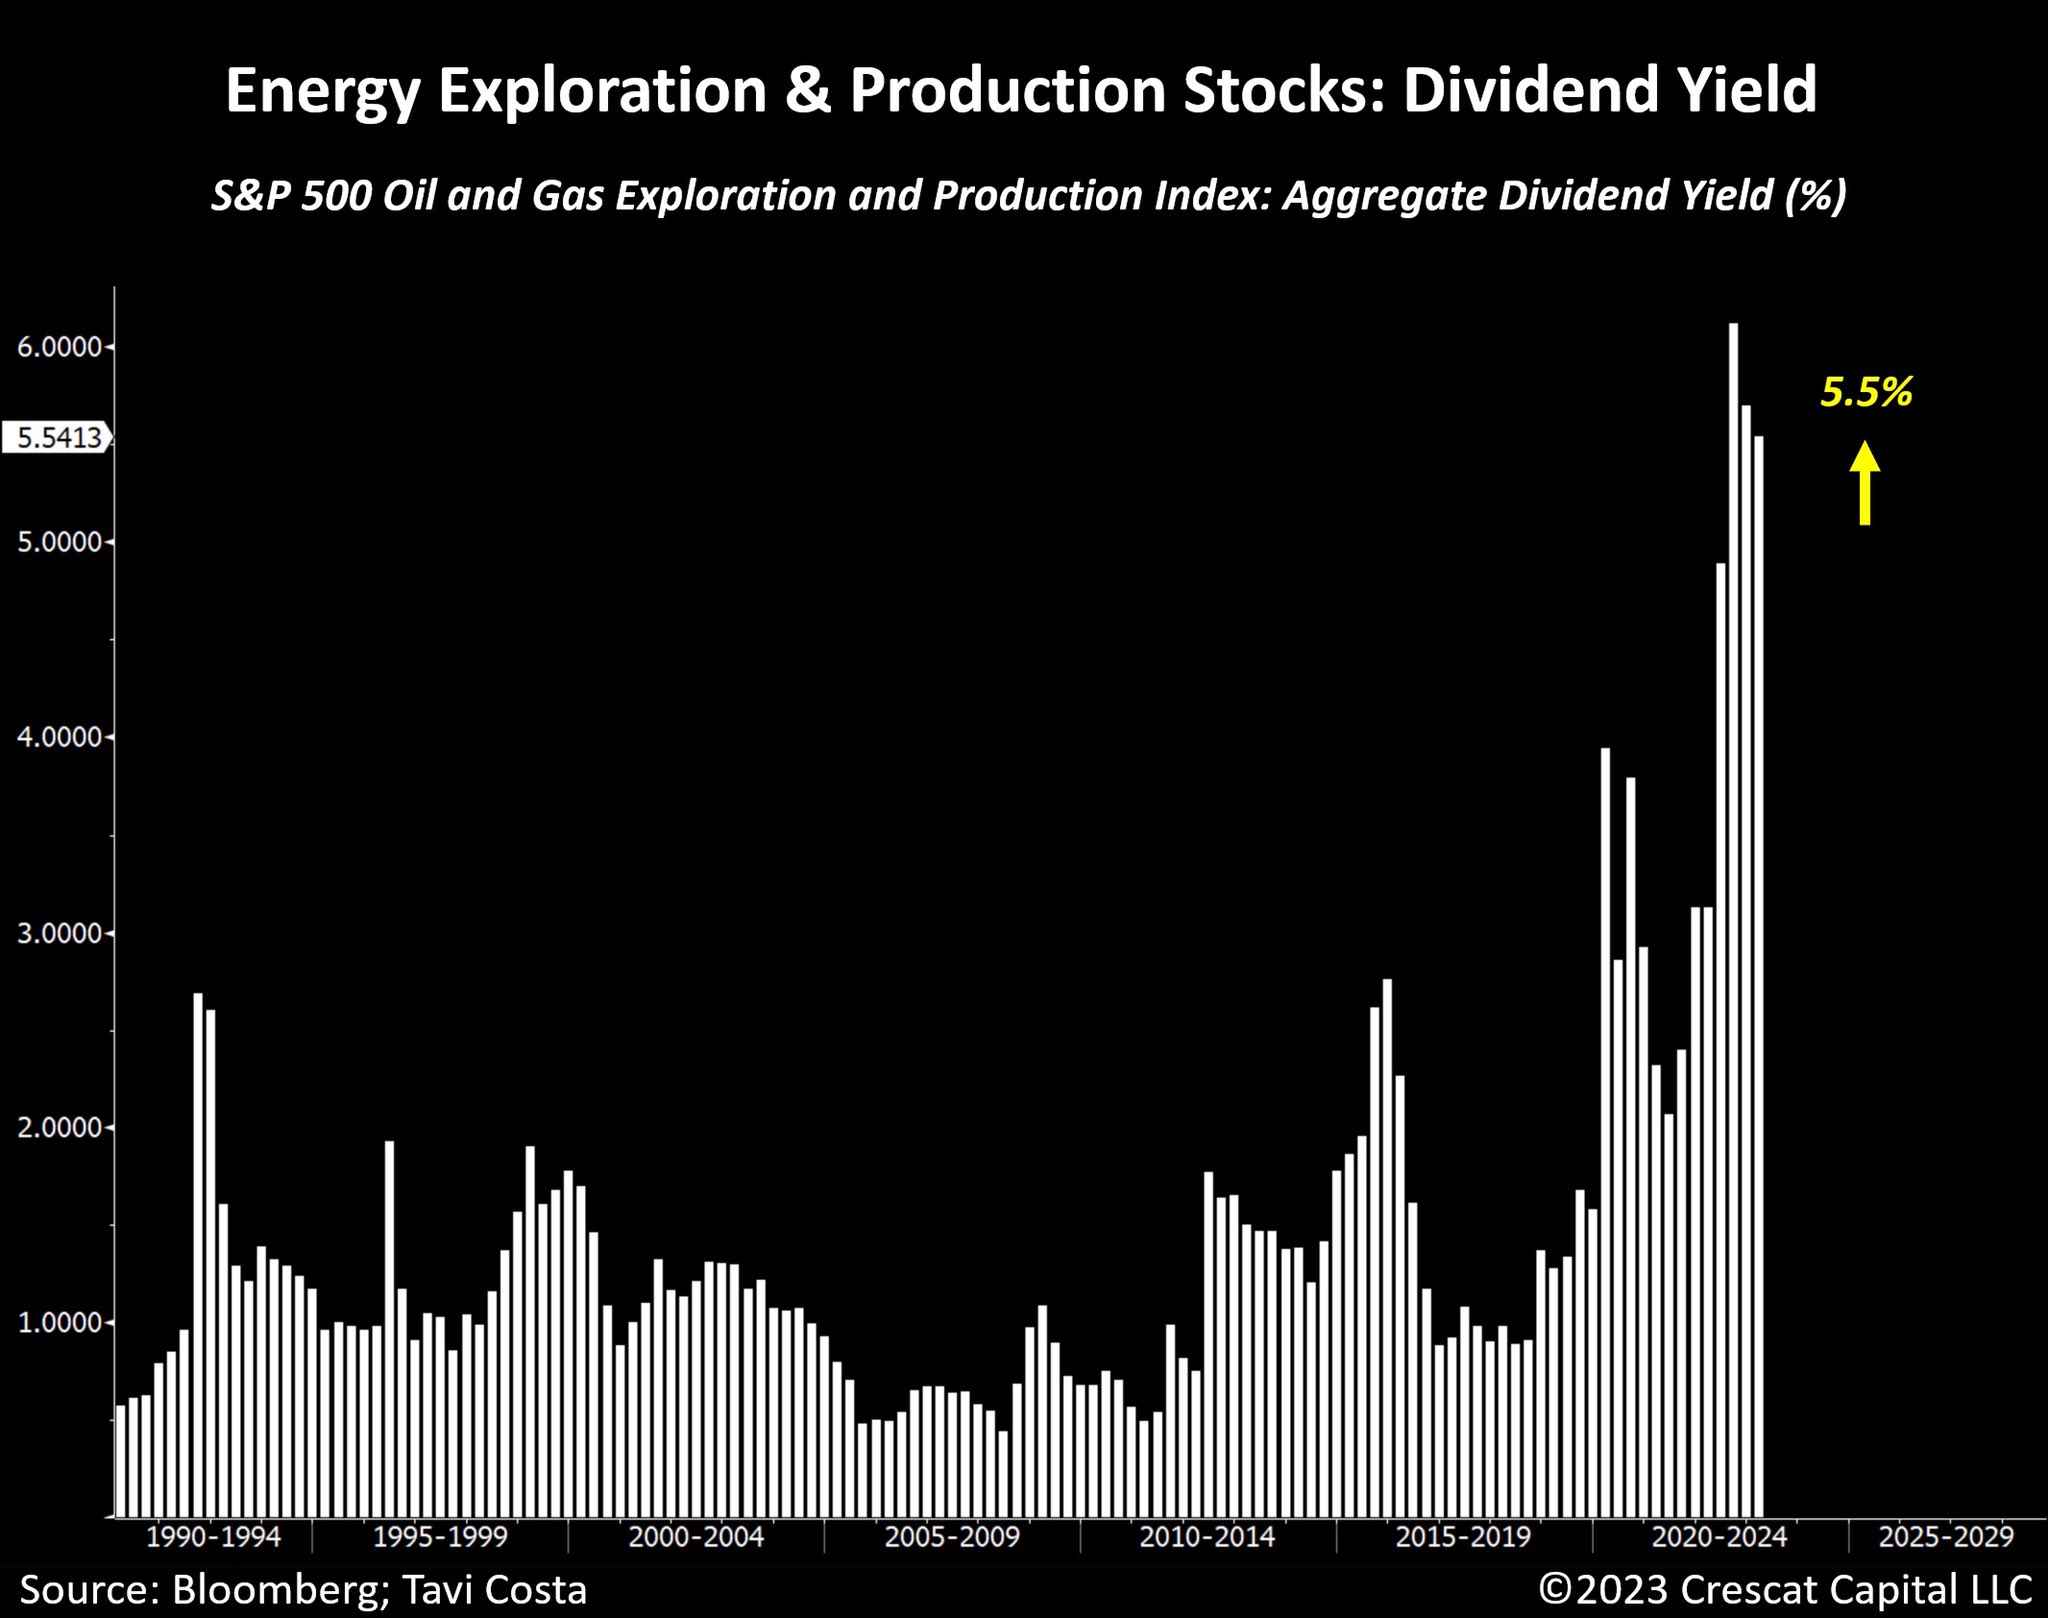 Oil and gas exploration & production companies are by far paying their highest dividend yield in history of the data